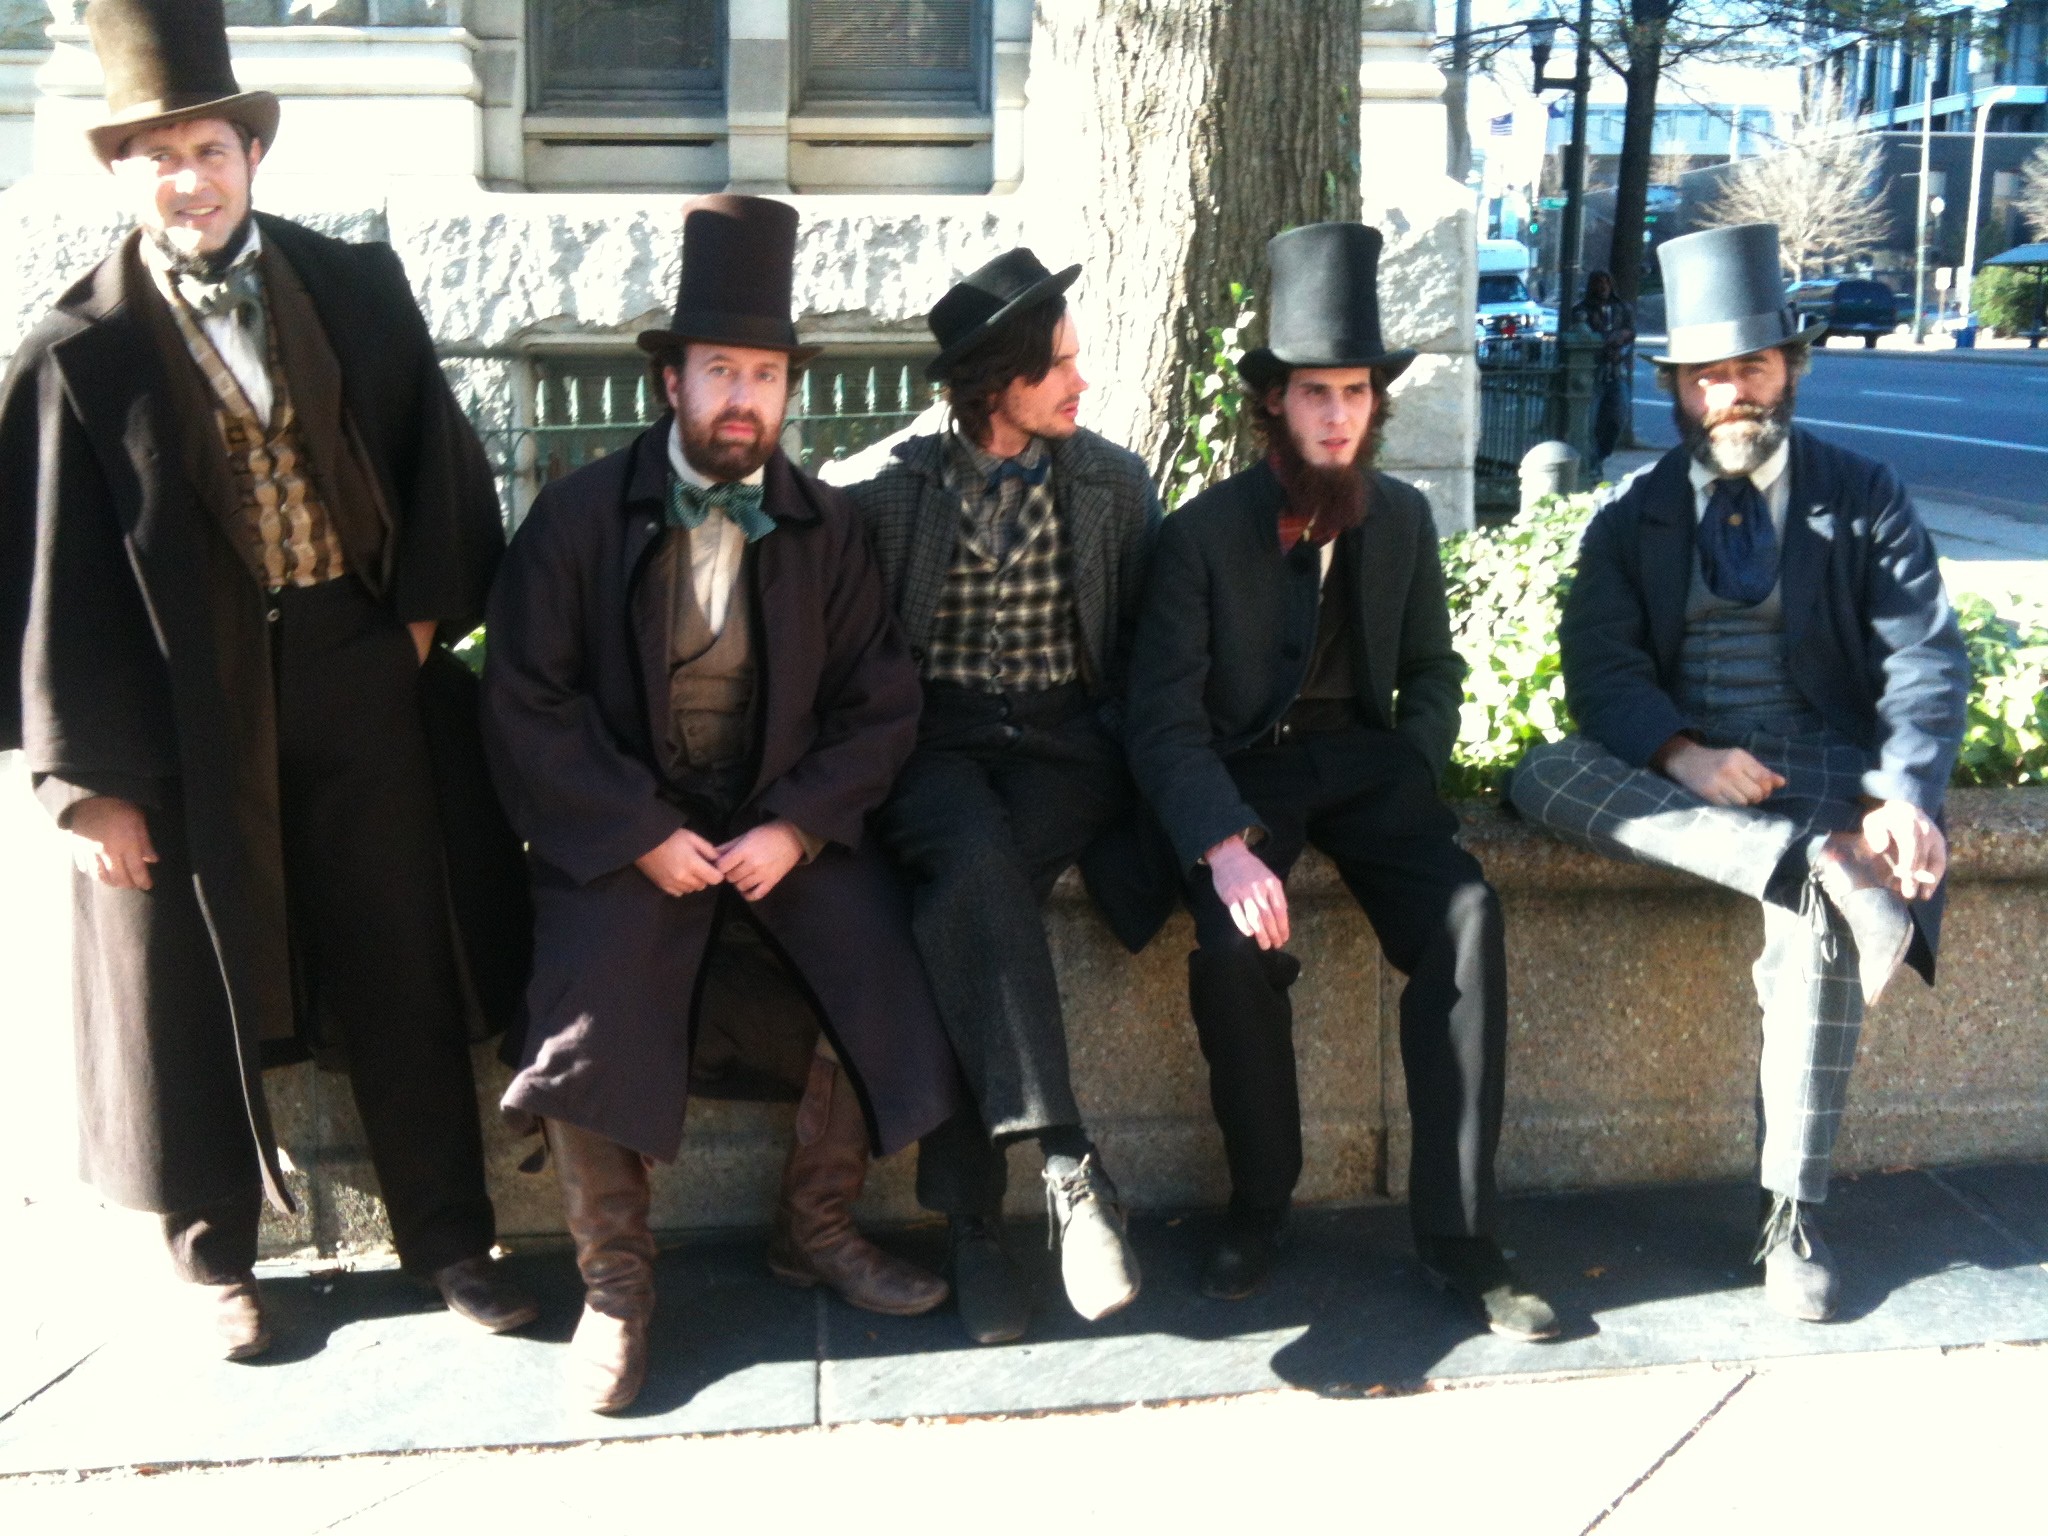 On a break from shooting near Capitol Square, the writer, second from left, with fellow extras Sean Burke, Tim Blackwood, Mark Gibson and Michael Marunde.